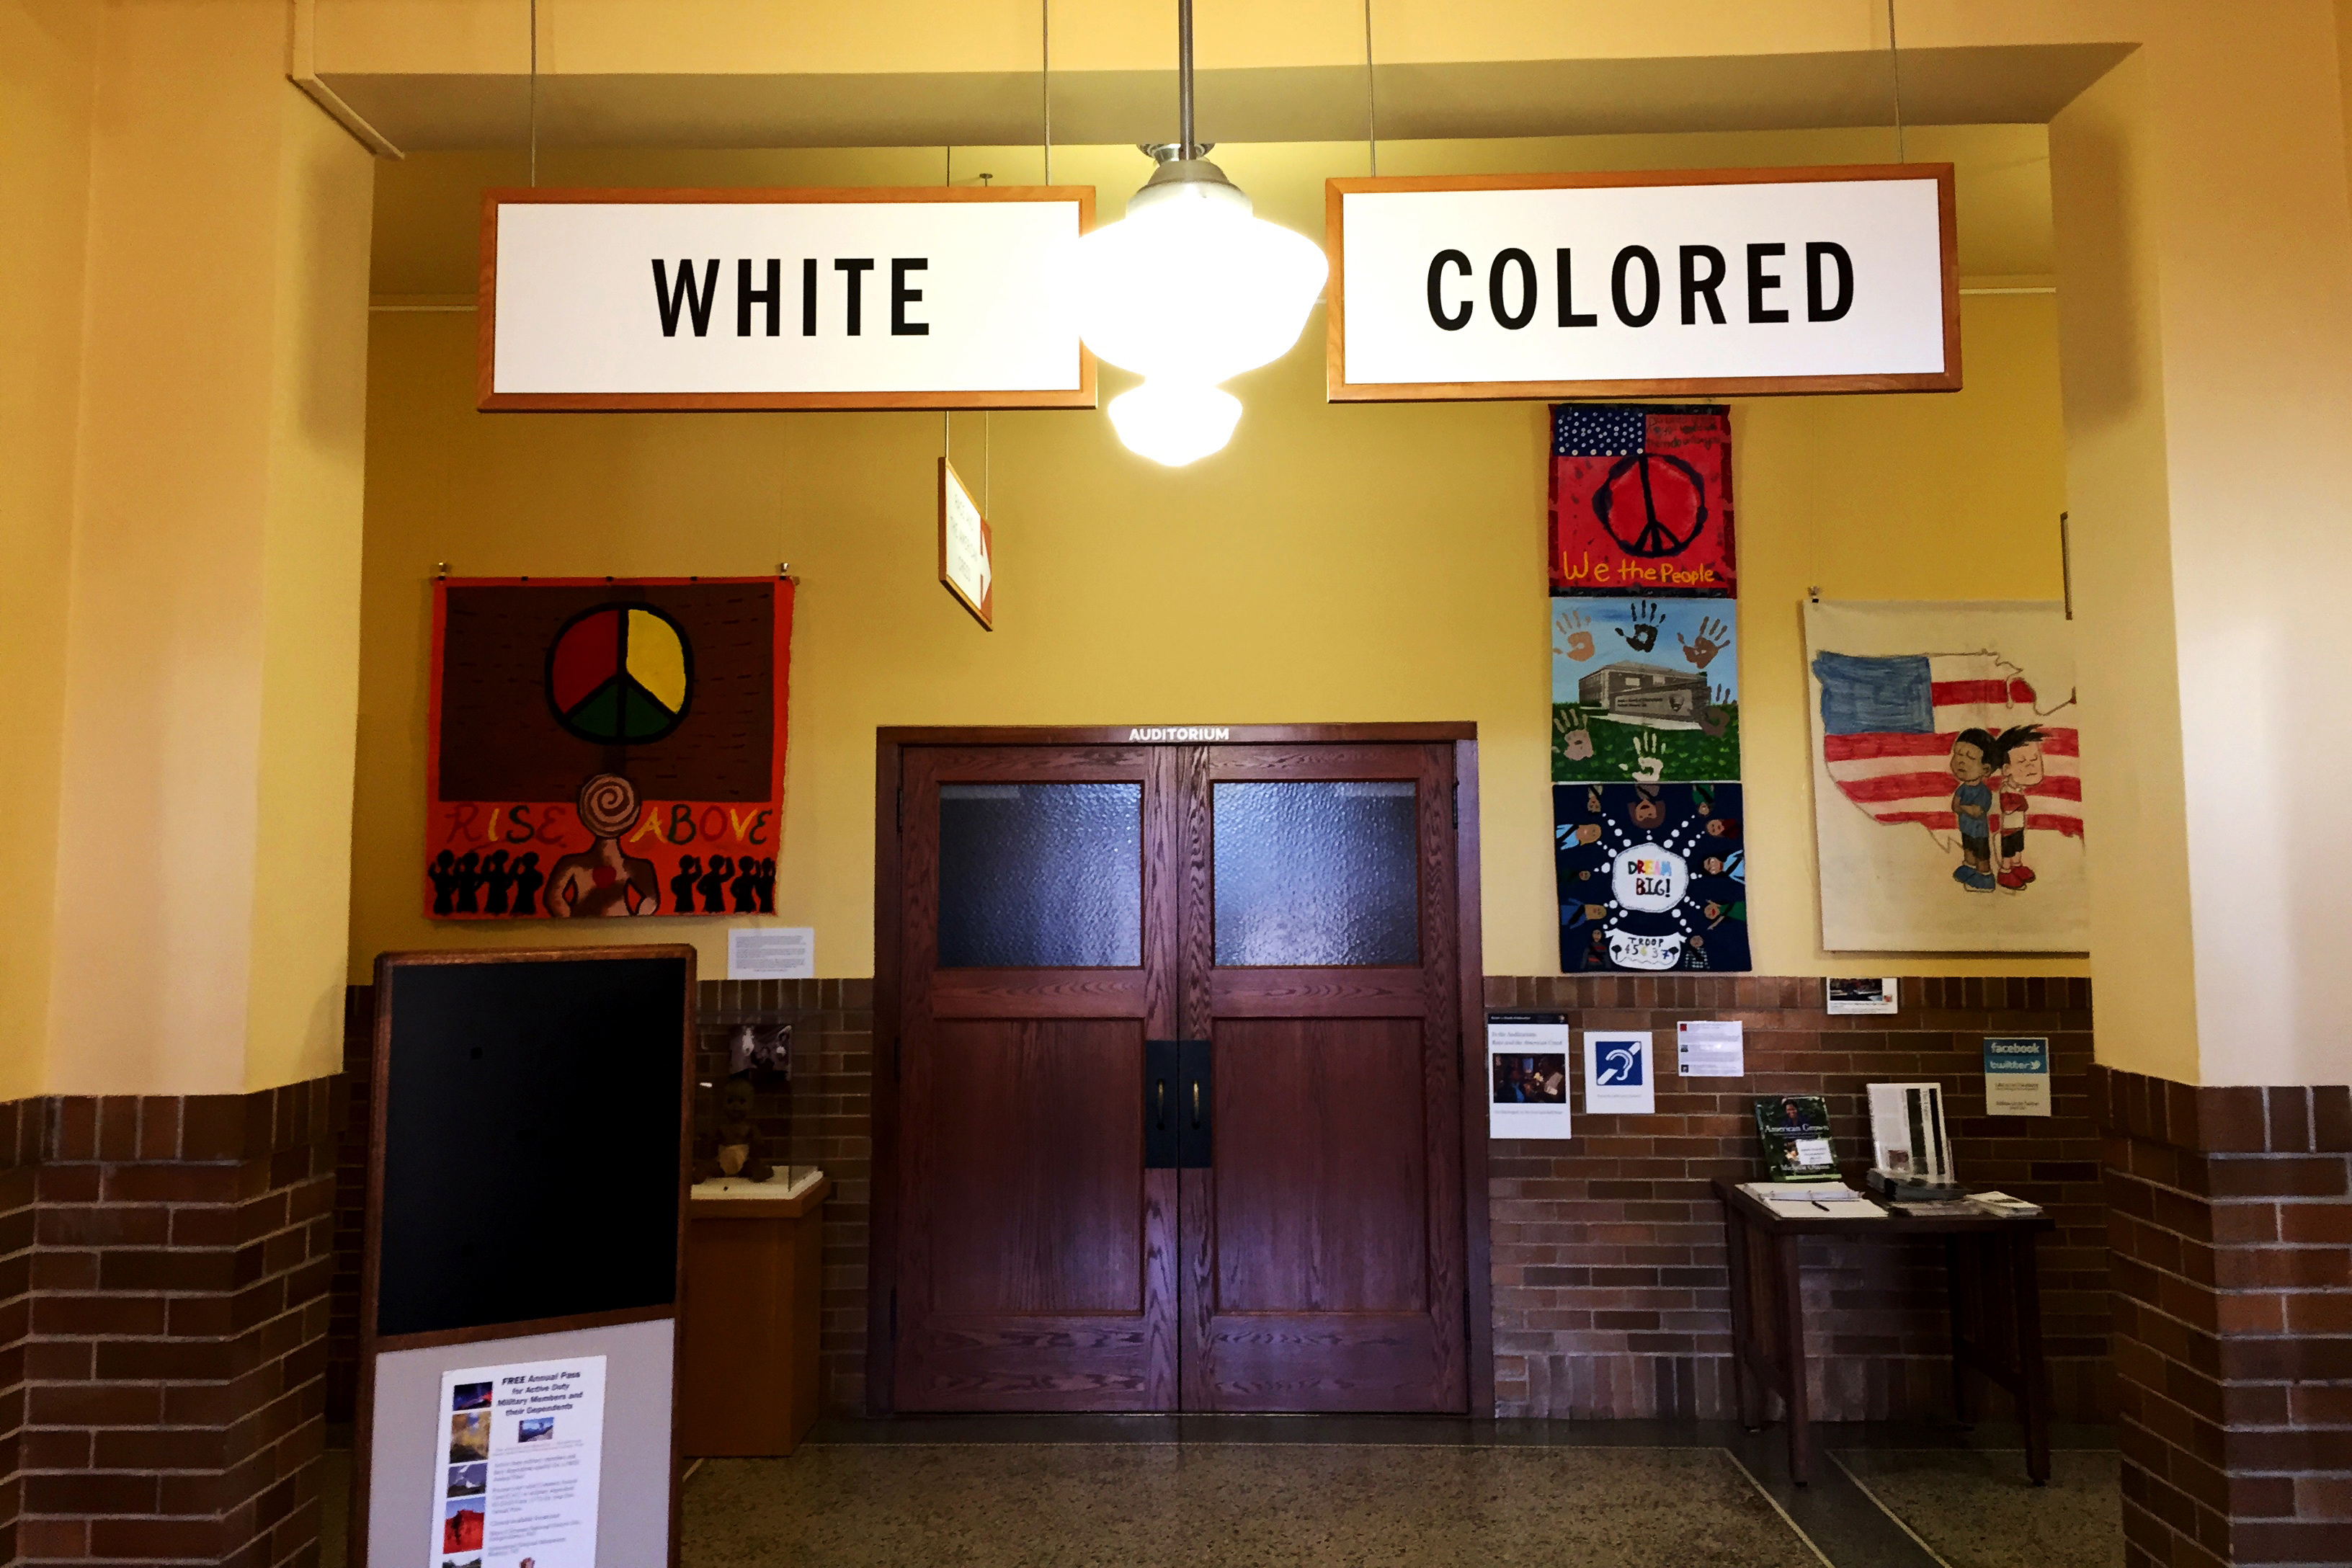 A segregated hallway in the Brown v. Board of Education National Historic Site. Image by Lauren Wellicome / Lonely Planet